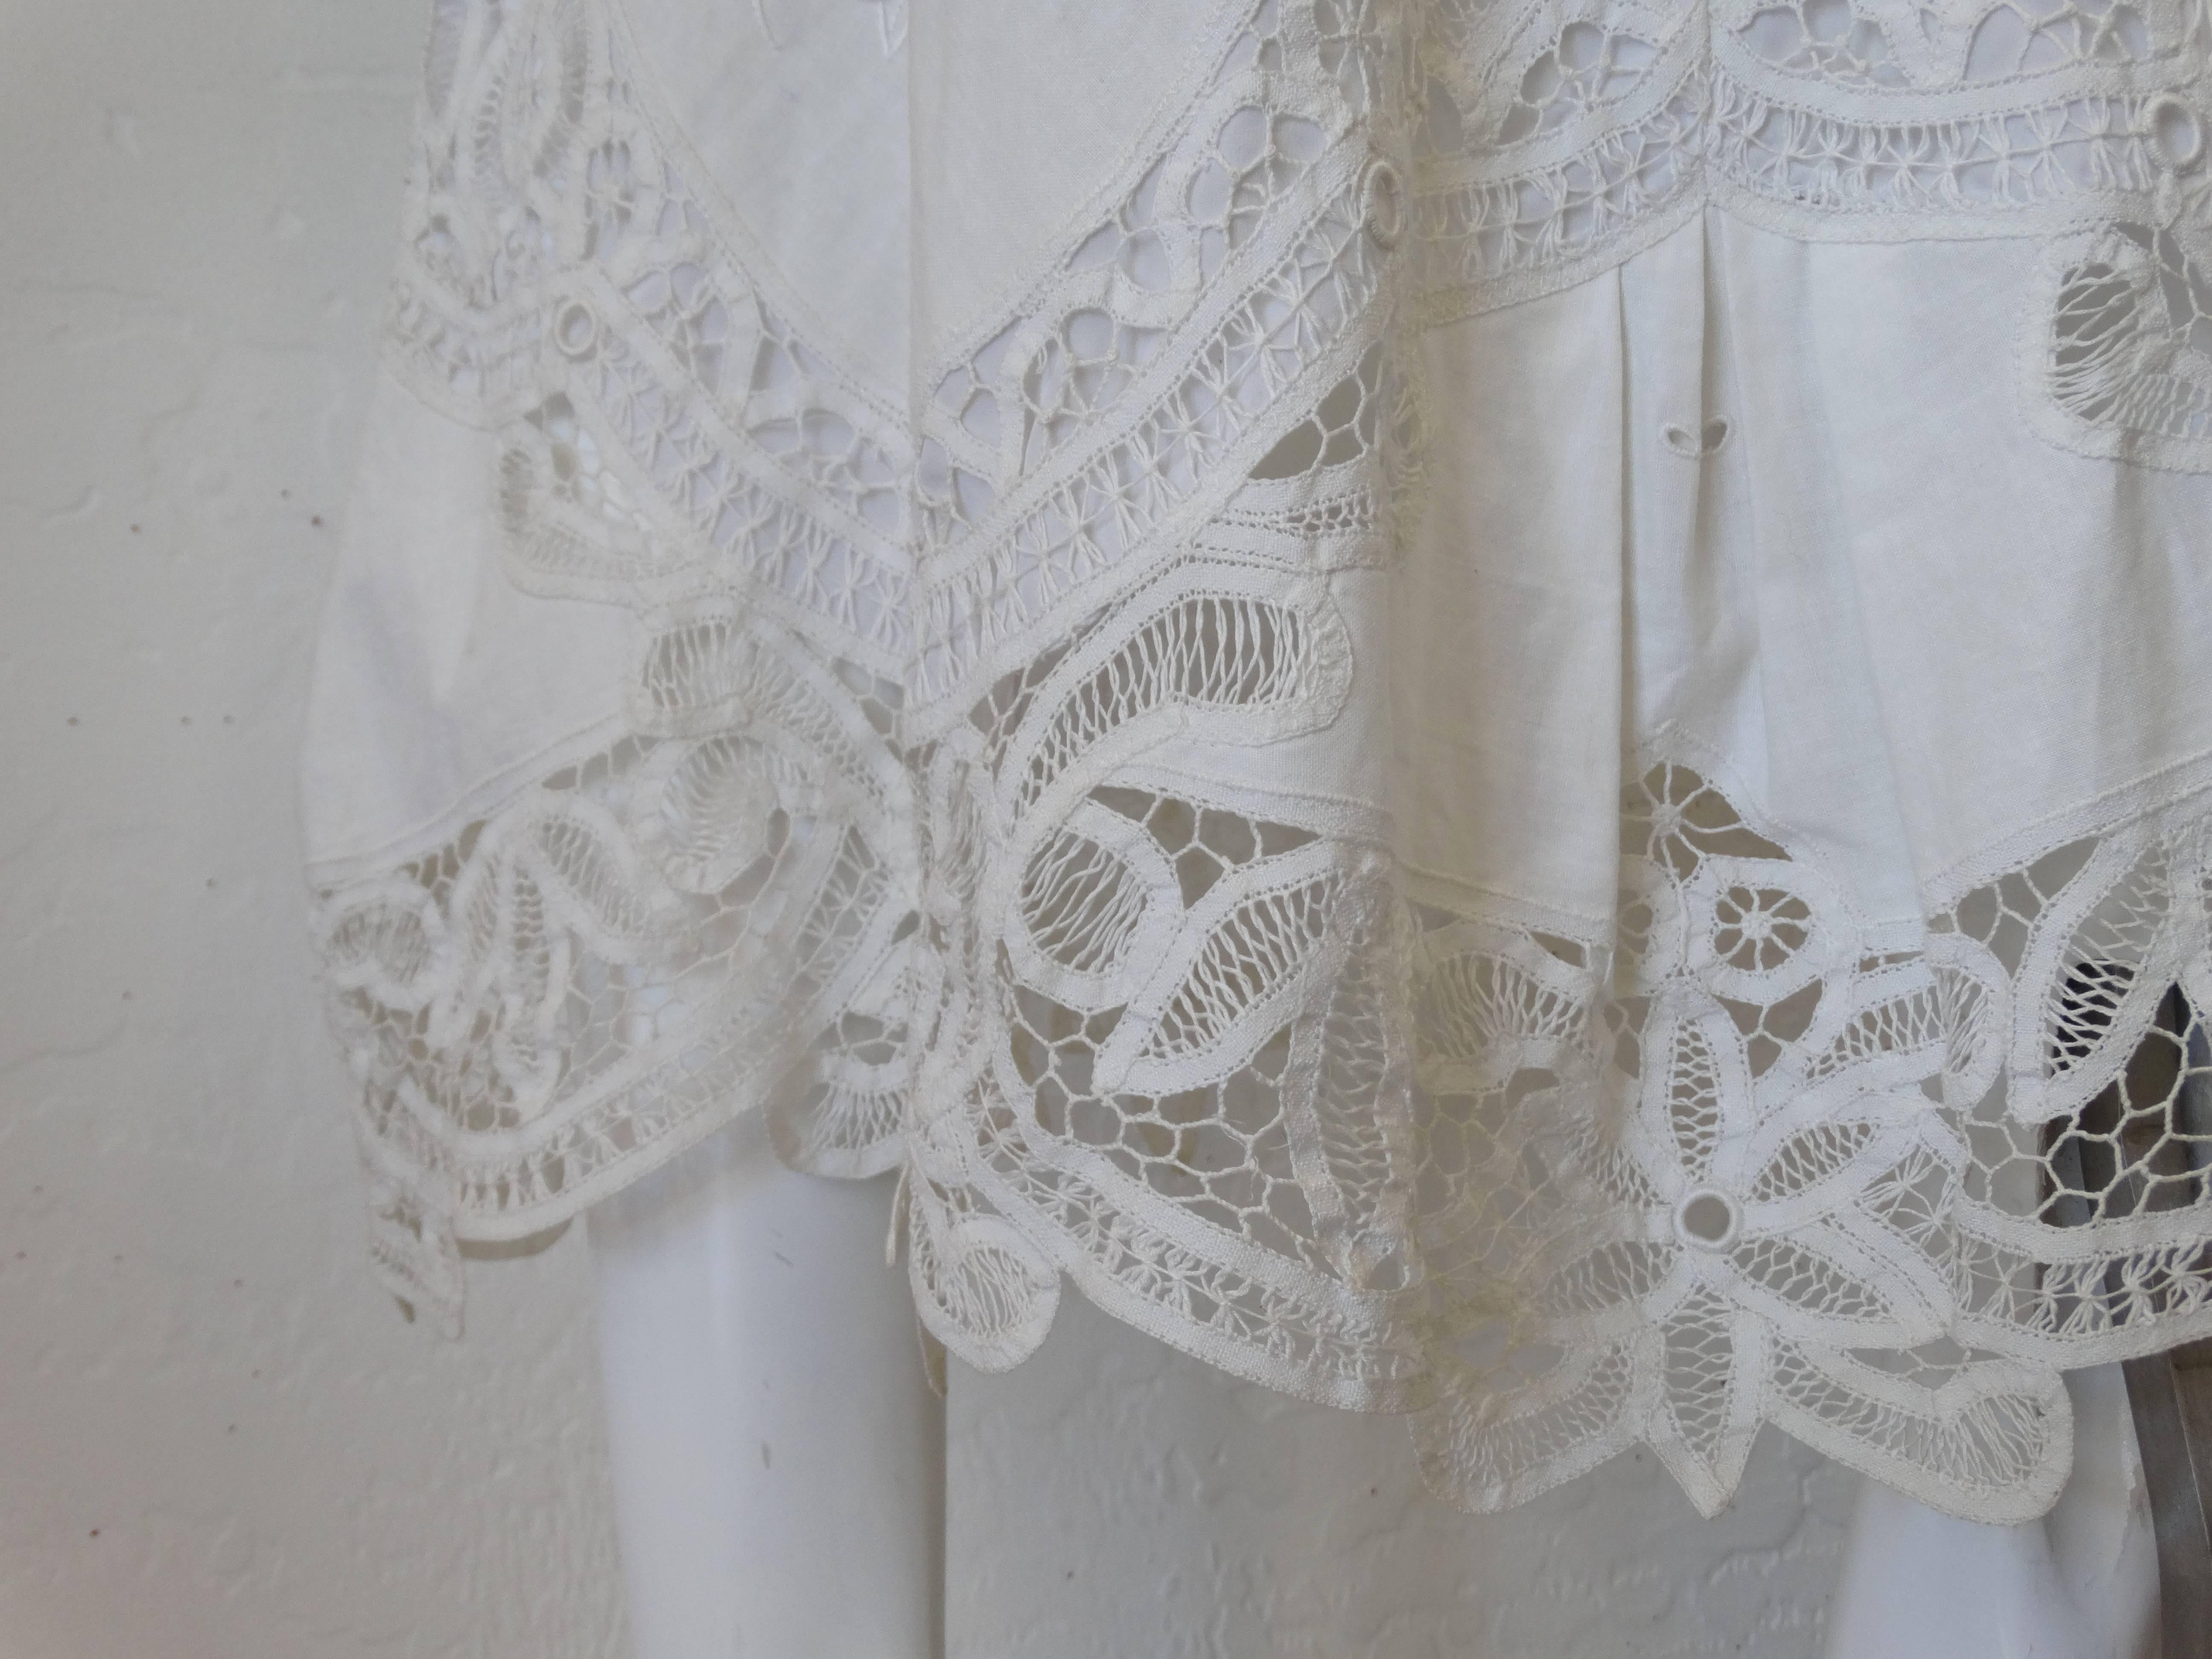 This gorgeous 1970s-1980s lace dress is in great vintage condition. Made by Becky Bisoulis- a Chicago designer known for her work with embroidery and lace. Creamy white cotton with lace overlays. Intricate cotton lace appliqué trim on the fluttery